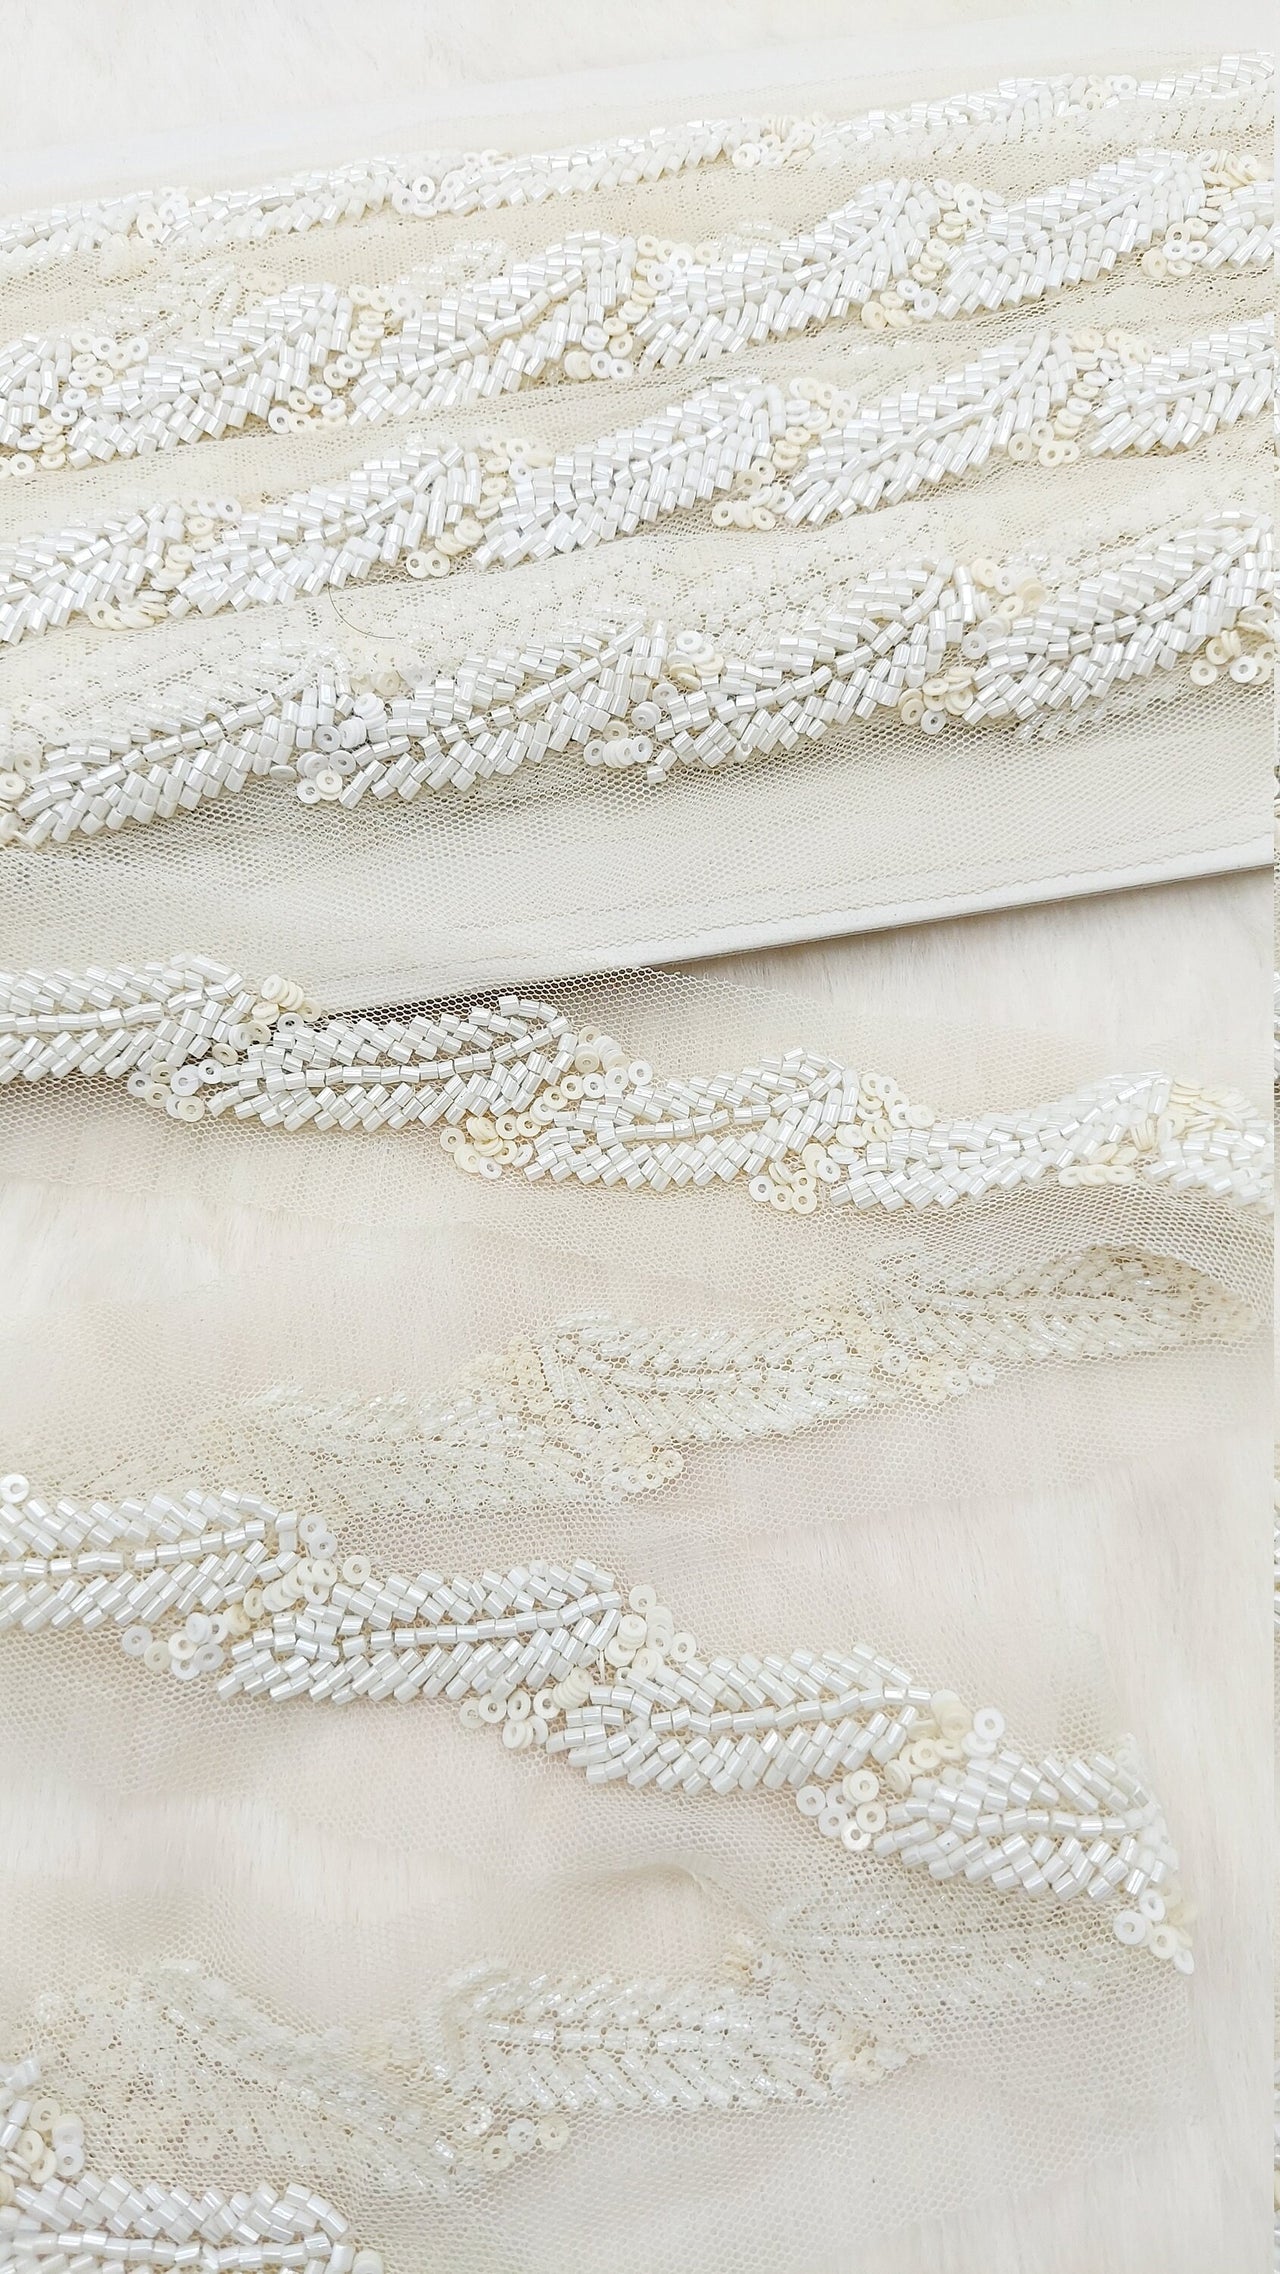 White Net Bridal Trim In White Beaded Leaf Embroidery, Hand Embroidered Bead Lace, Floral Embroidered Trim